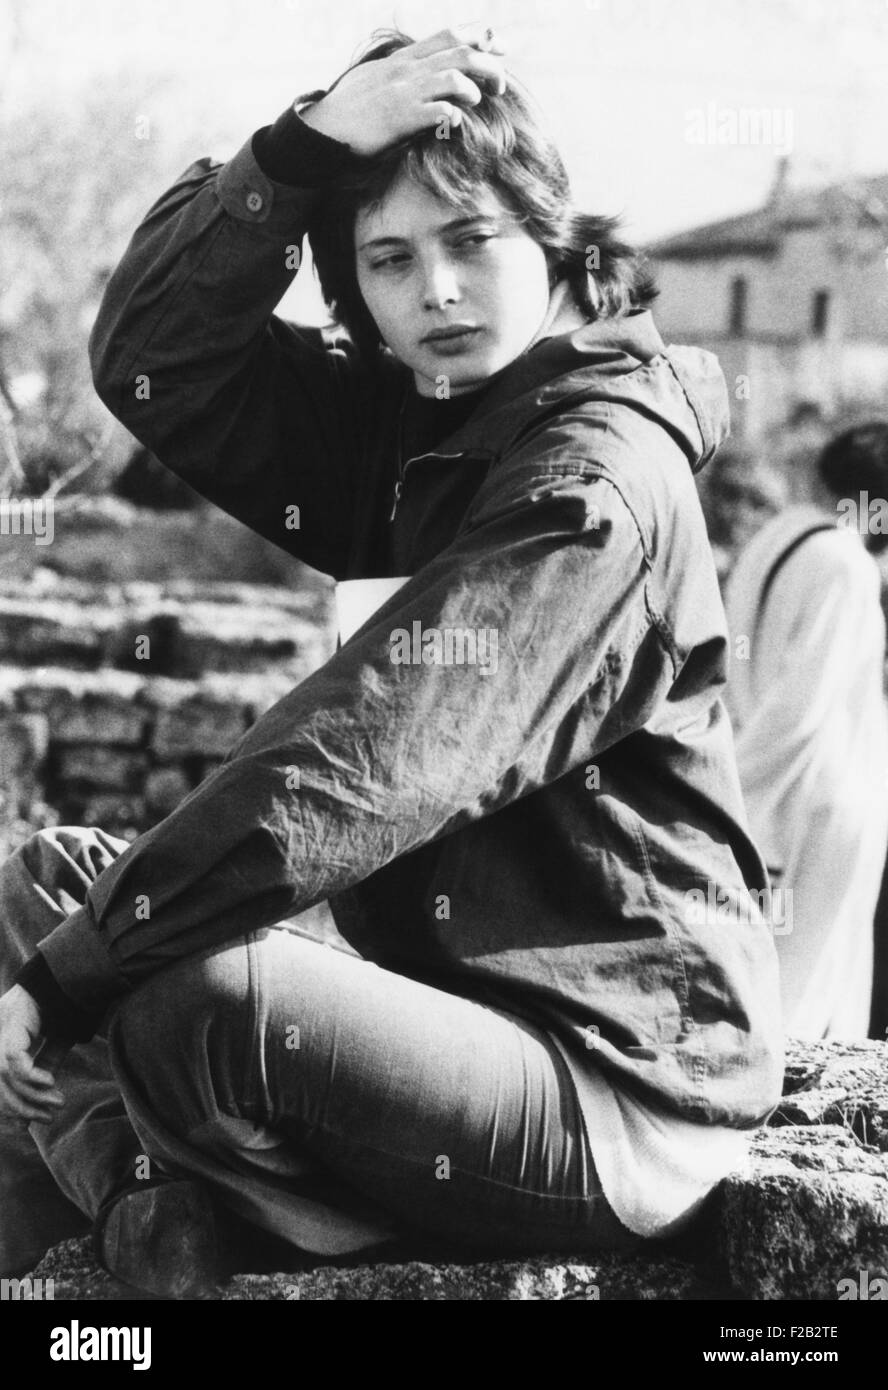 Isabella Rossellini, daughter of actress Ingrid Bergman and film director Roberto Rossellini. The 19 year old is secretary of production, and working with her father in filming ST. AGUSTINO at Pompeii, Italy. Feb. 25, 1972. (CSU 2015 7 336) Stock Photo